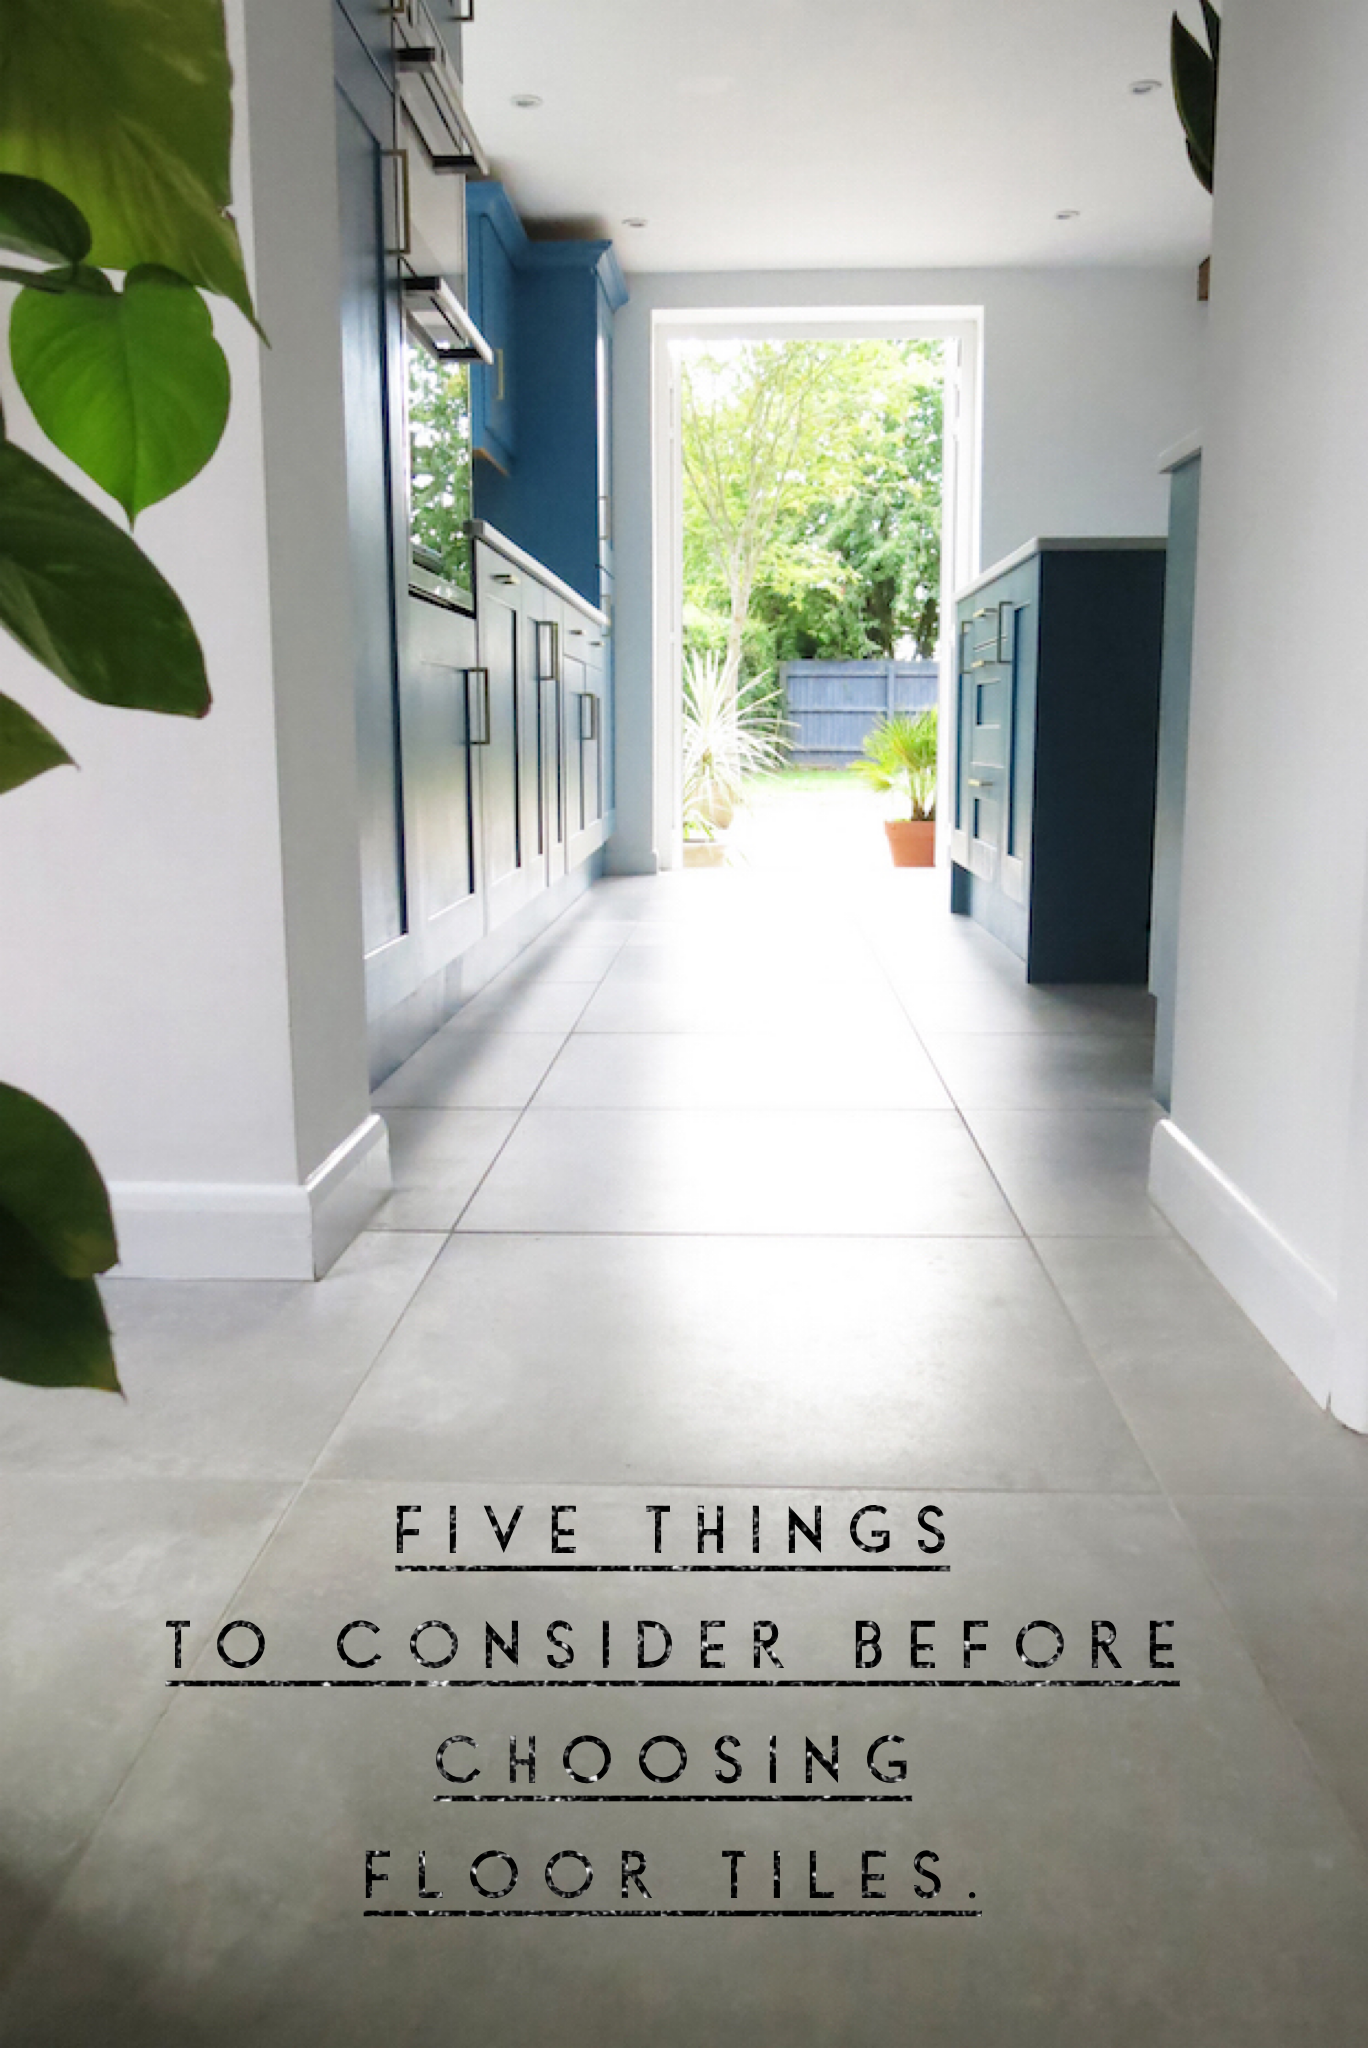 Here is what you should know about
ceramic tile floors